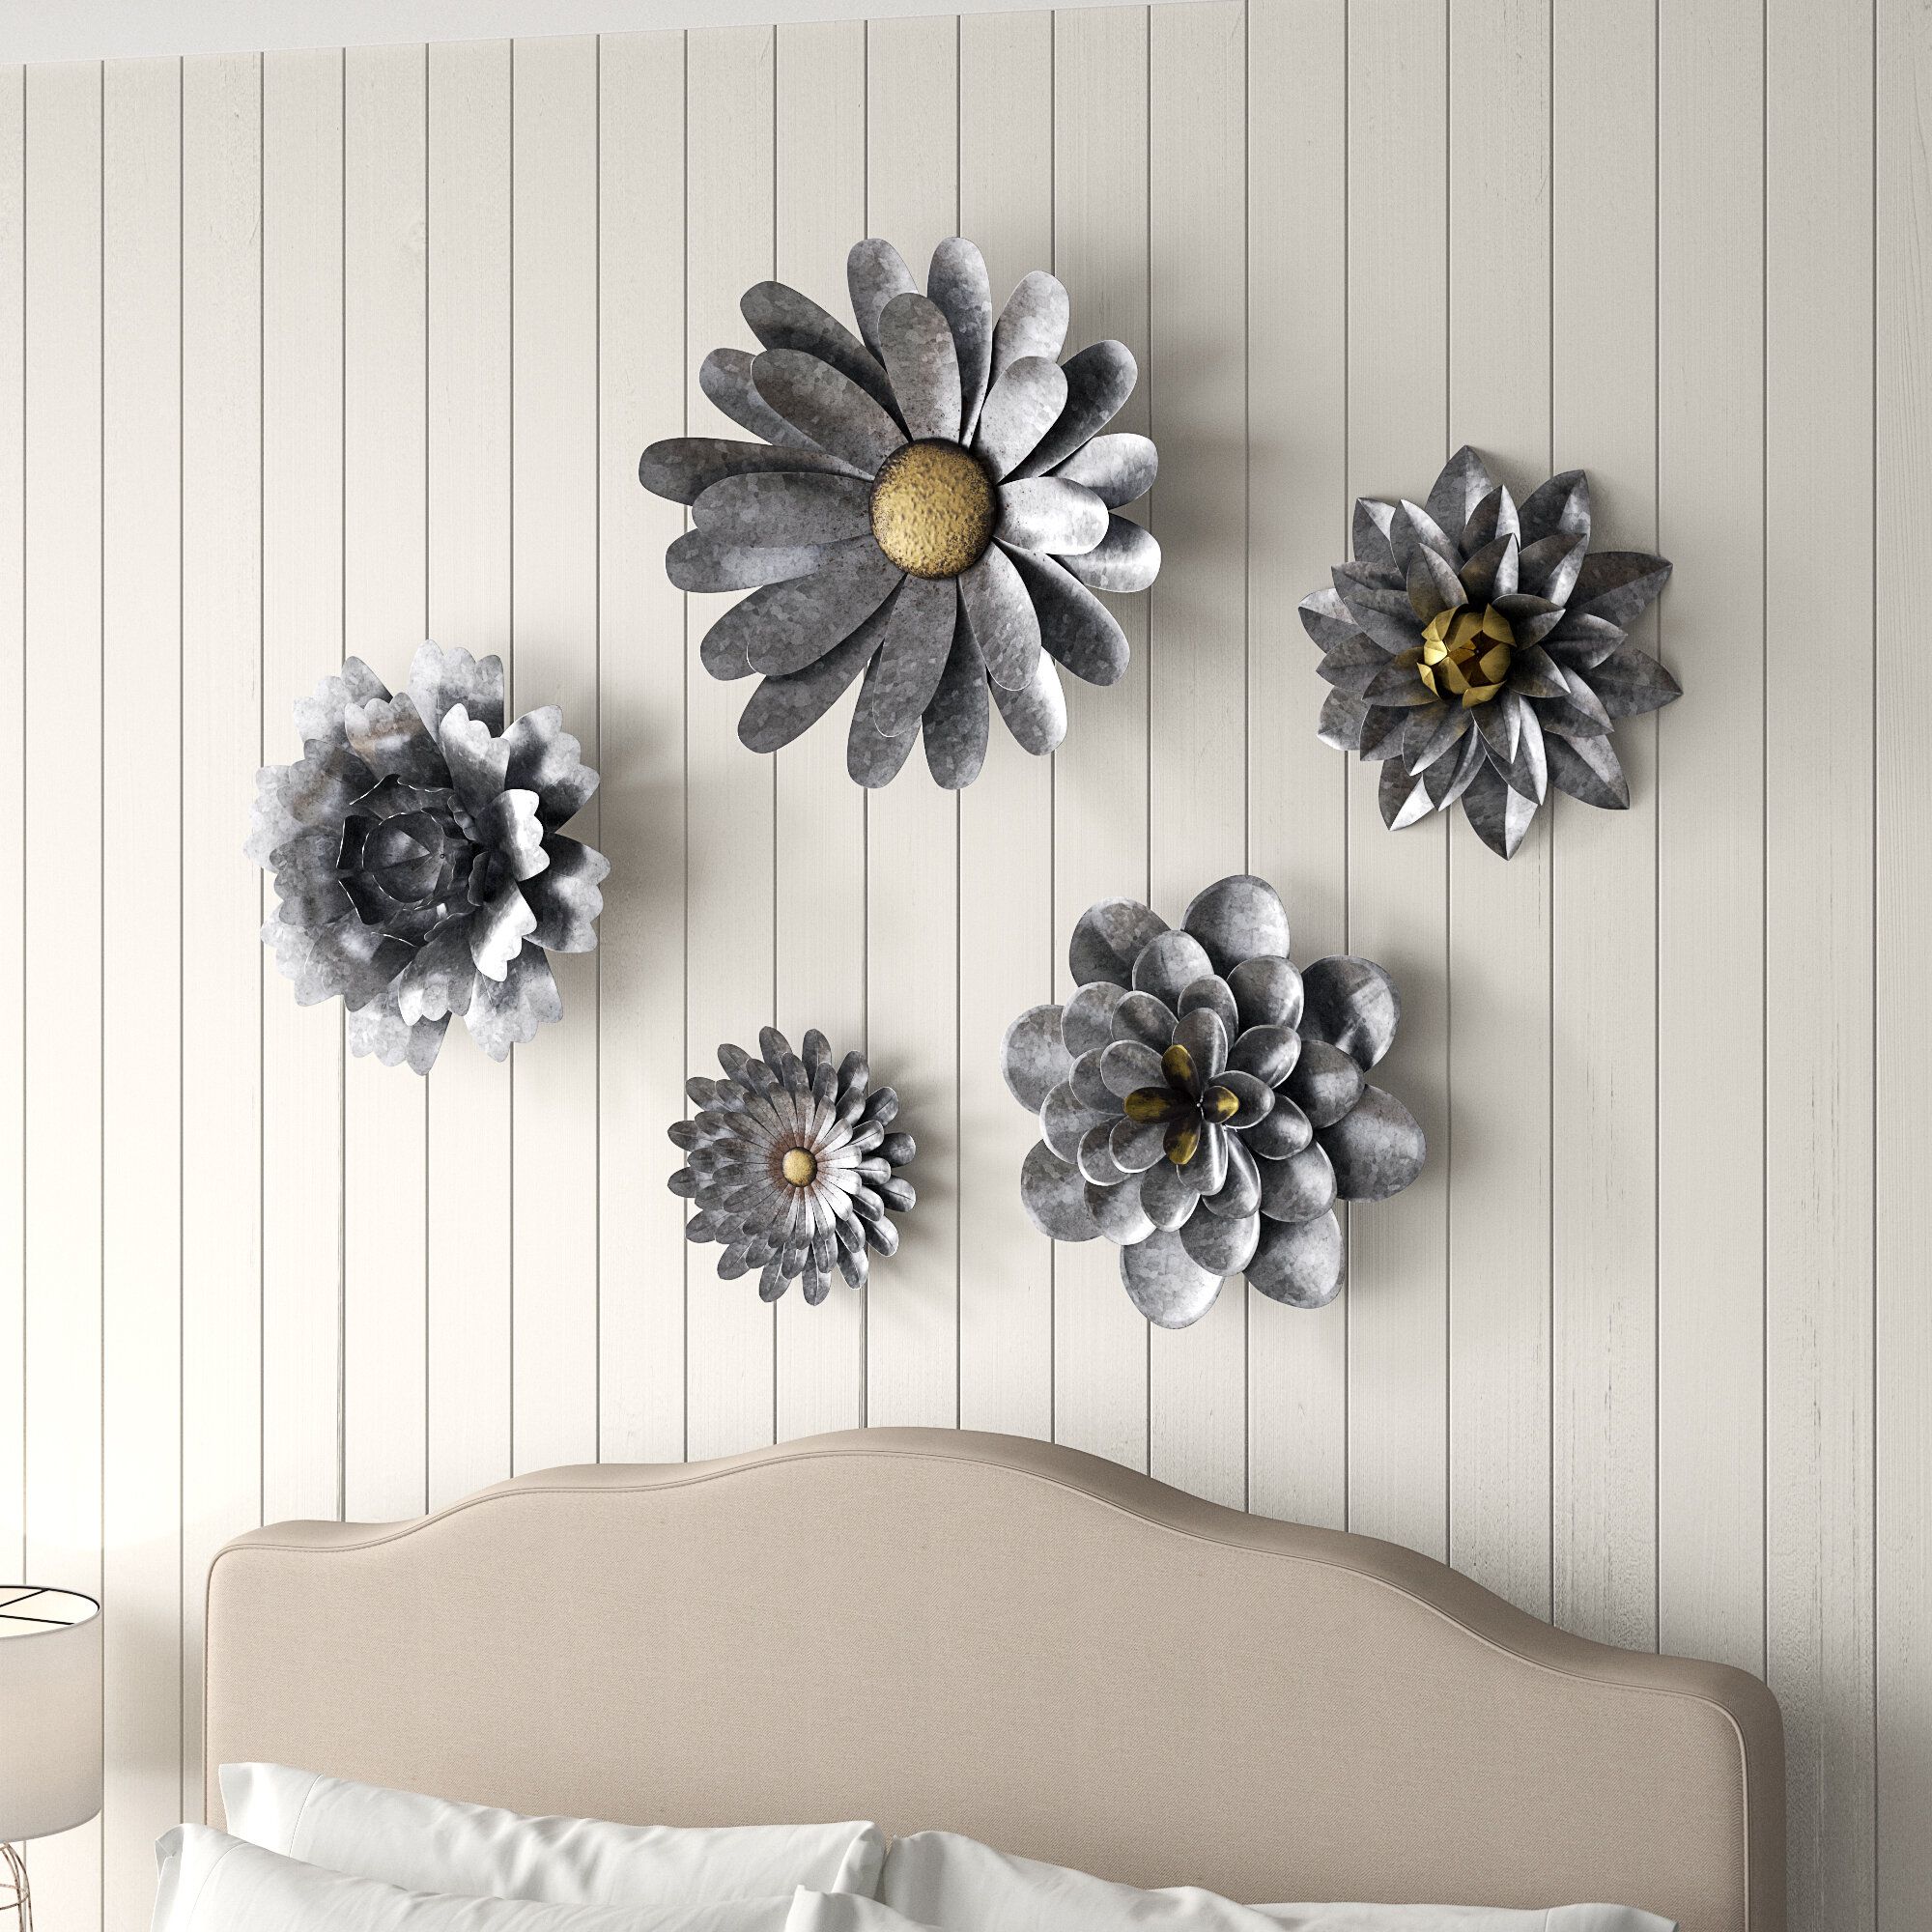 5 Piece Galvanized Metal Flower Hanging Wall Décor Set Intended For Flower Wall Decor (View 1 of 30)